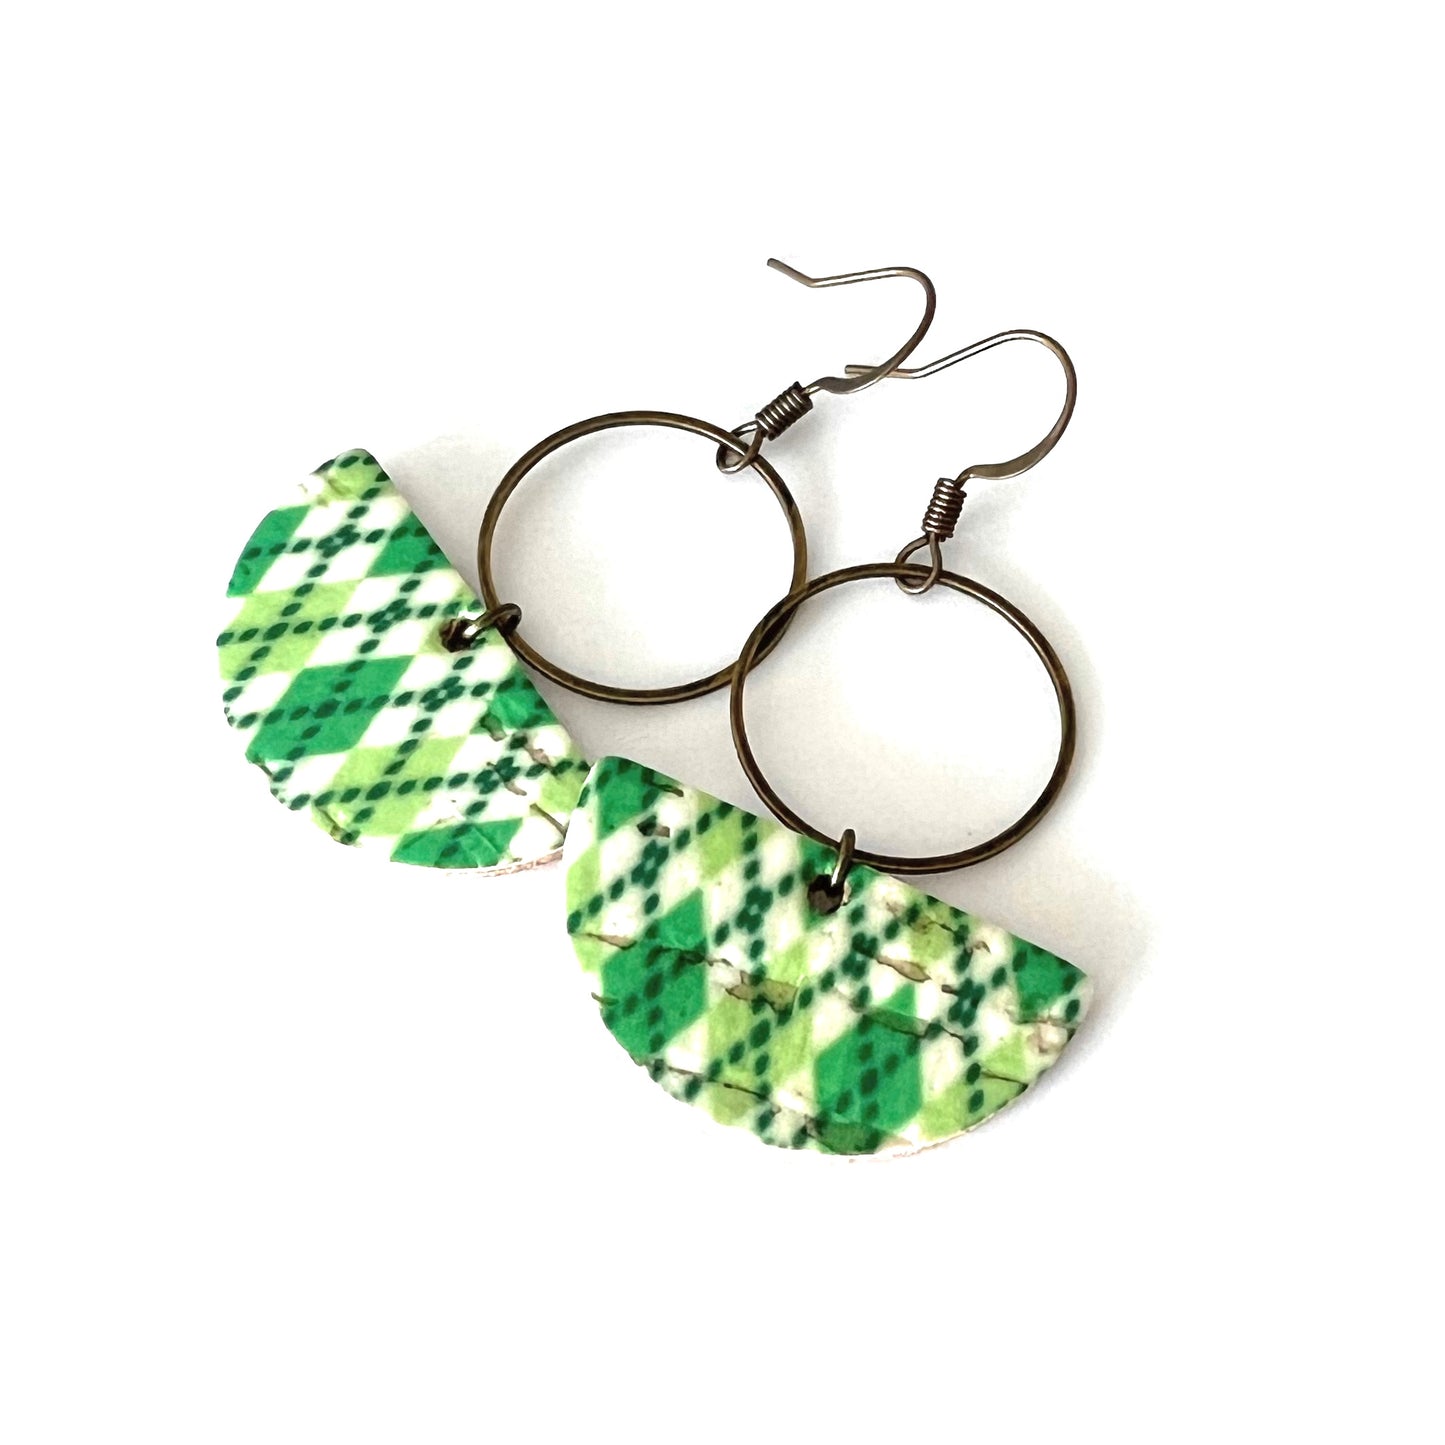 THE DROP in Green Argyle/ Lightweight Leather + Cork Statement Earrings